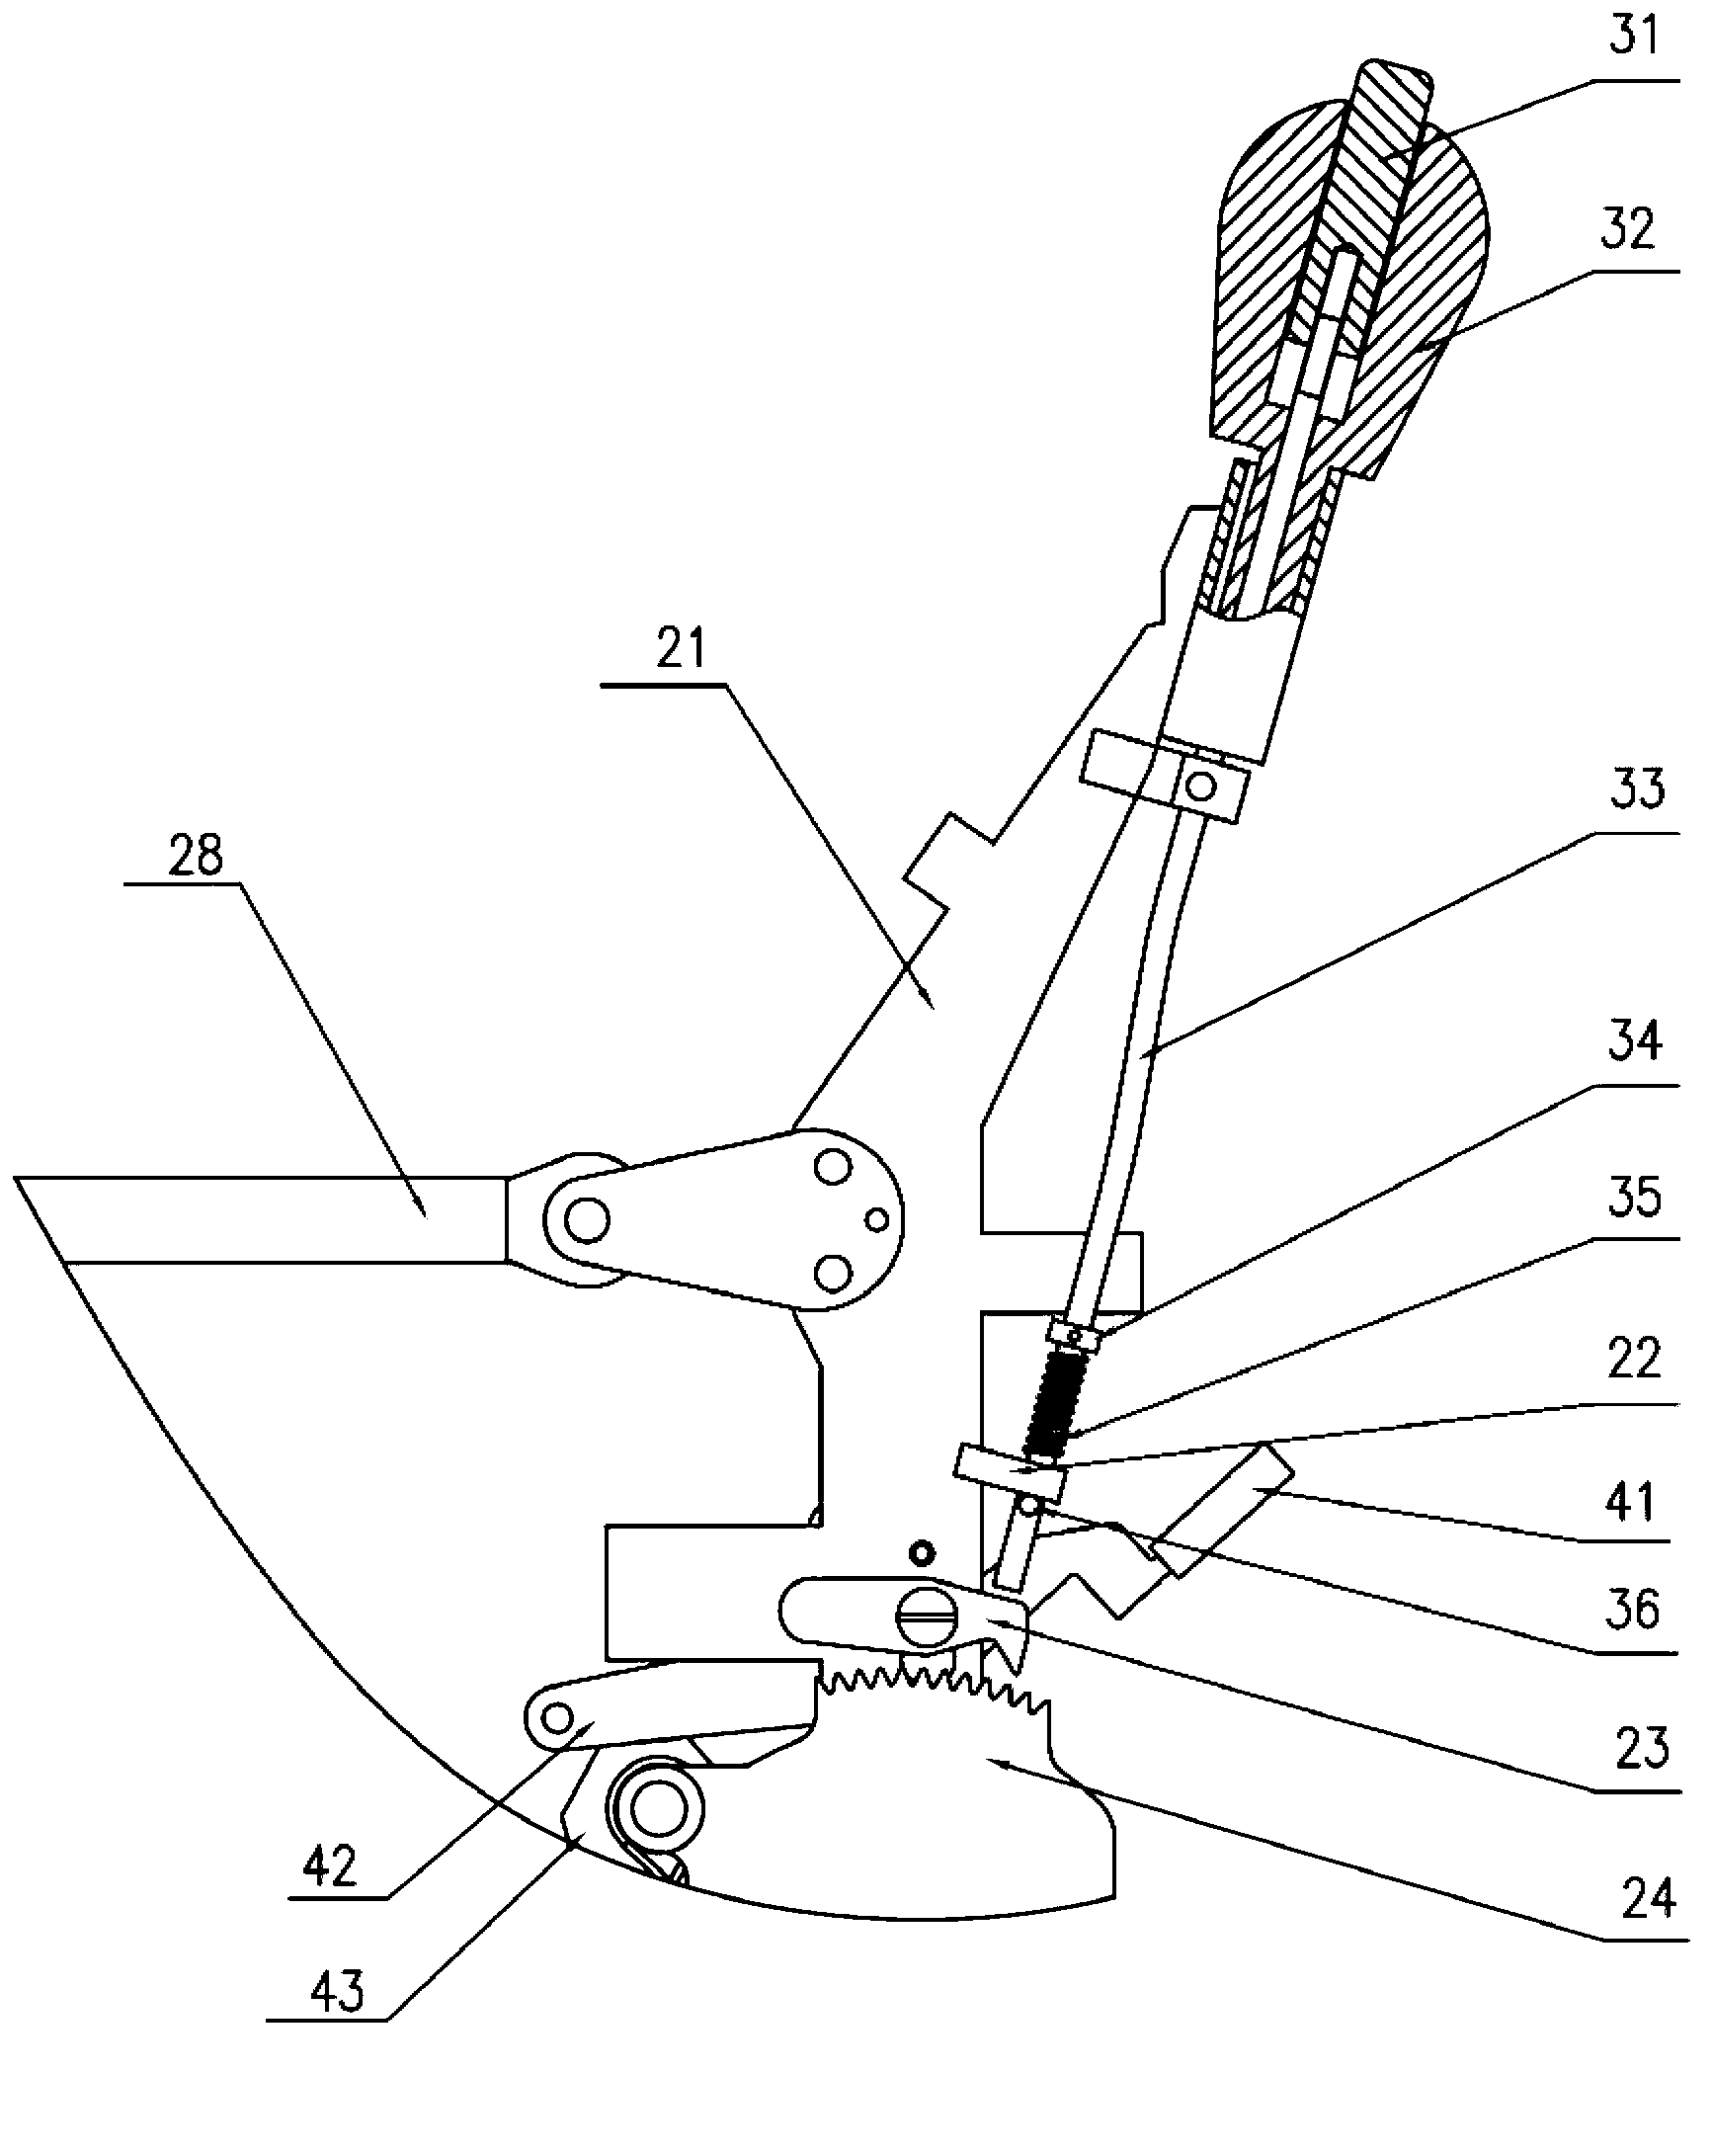 Manual control device for accelerator and brake system of automobile